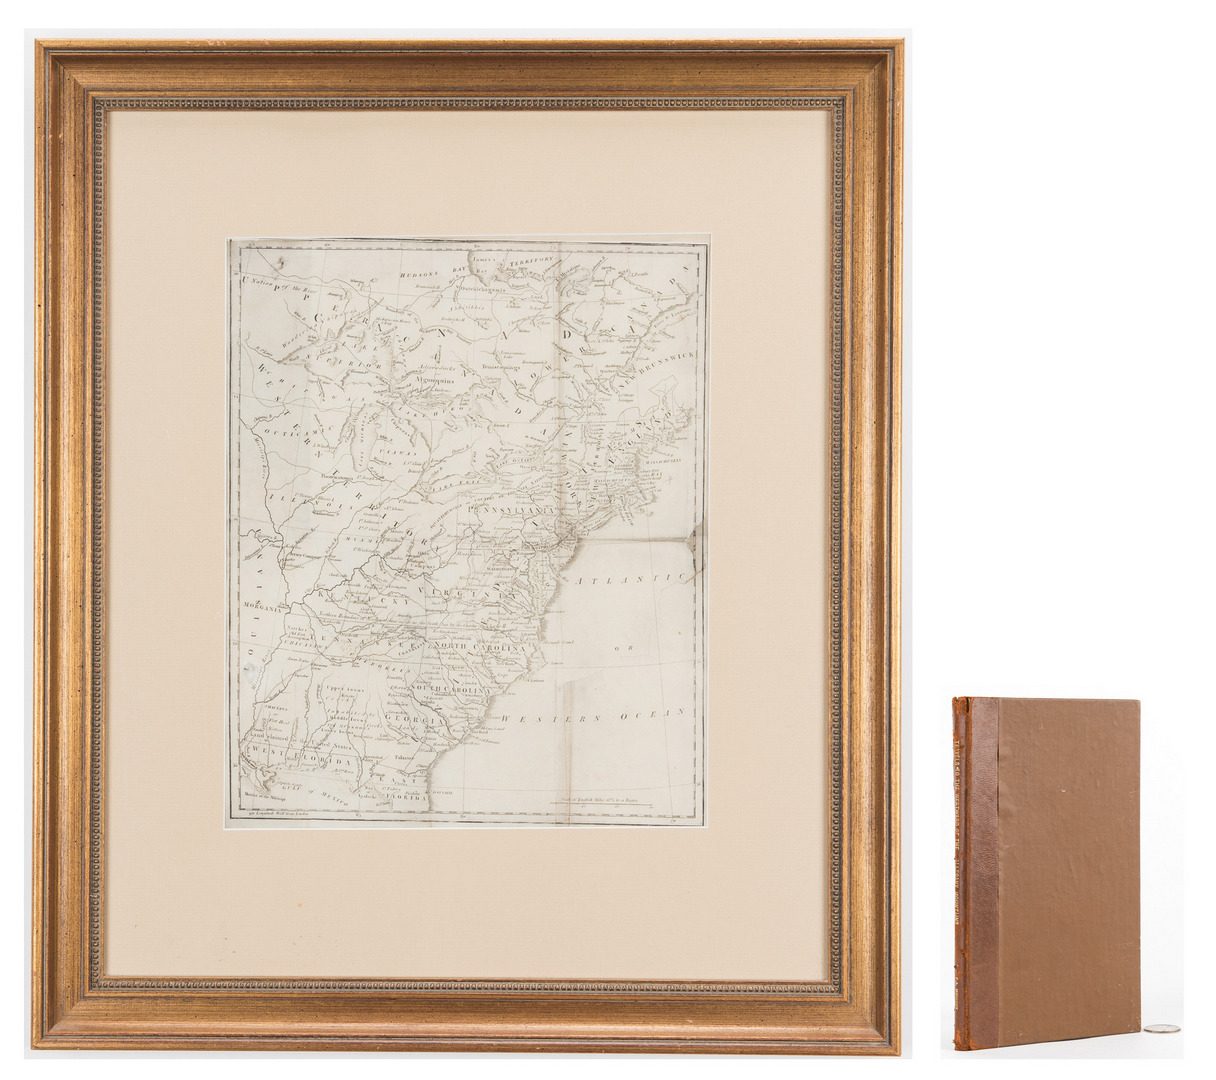 Lot 381: Michaux State of Franklinia Map and Book, 2 items